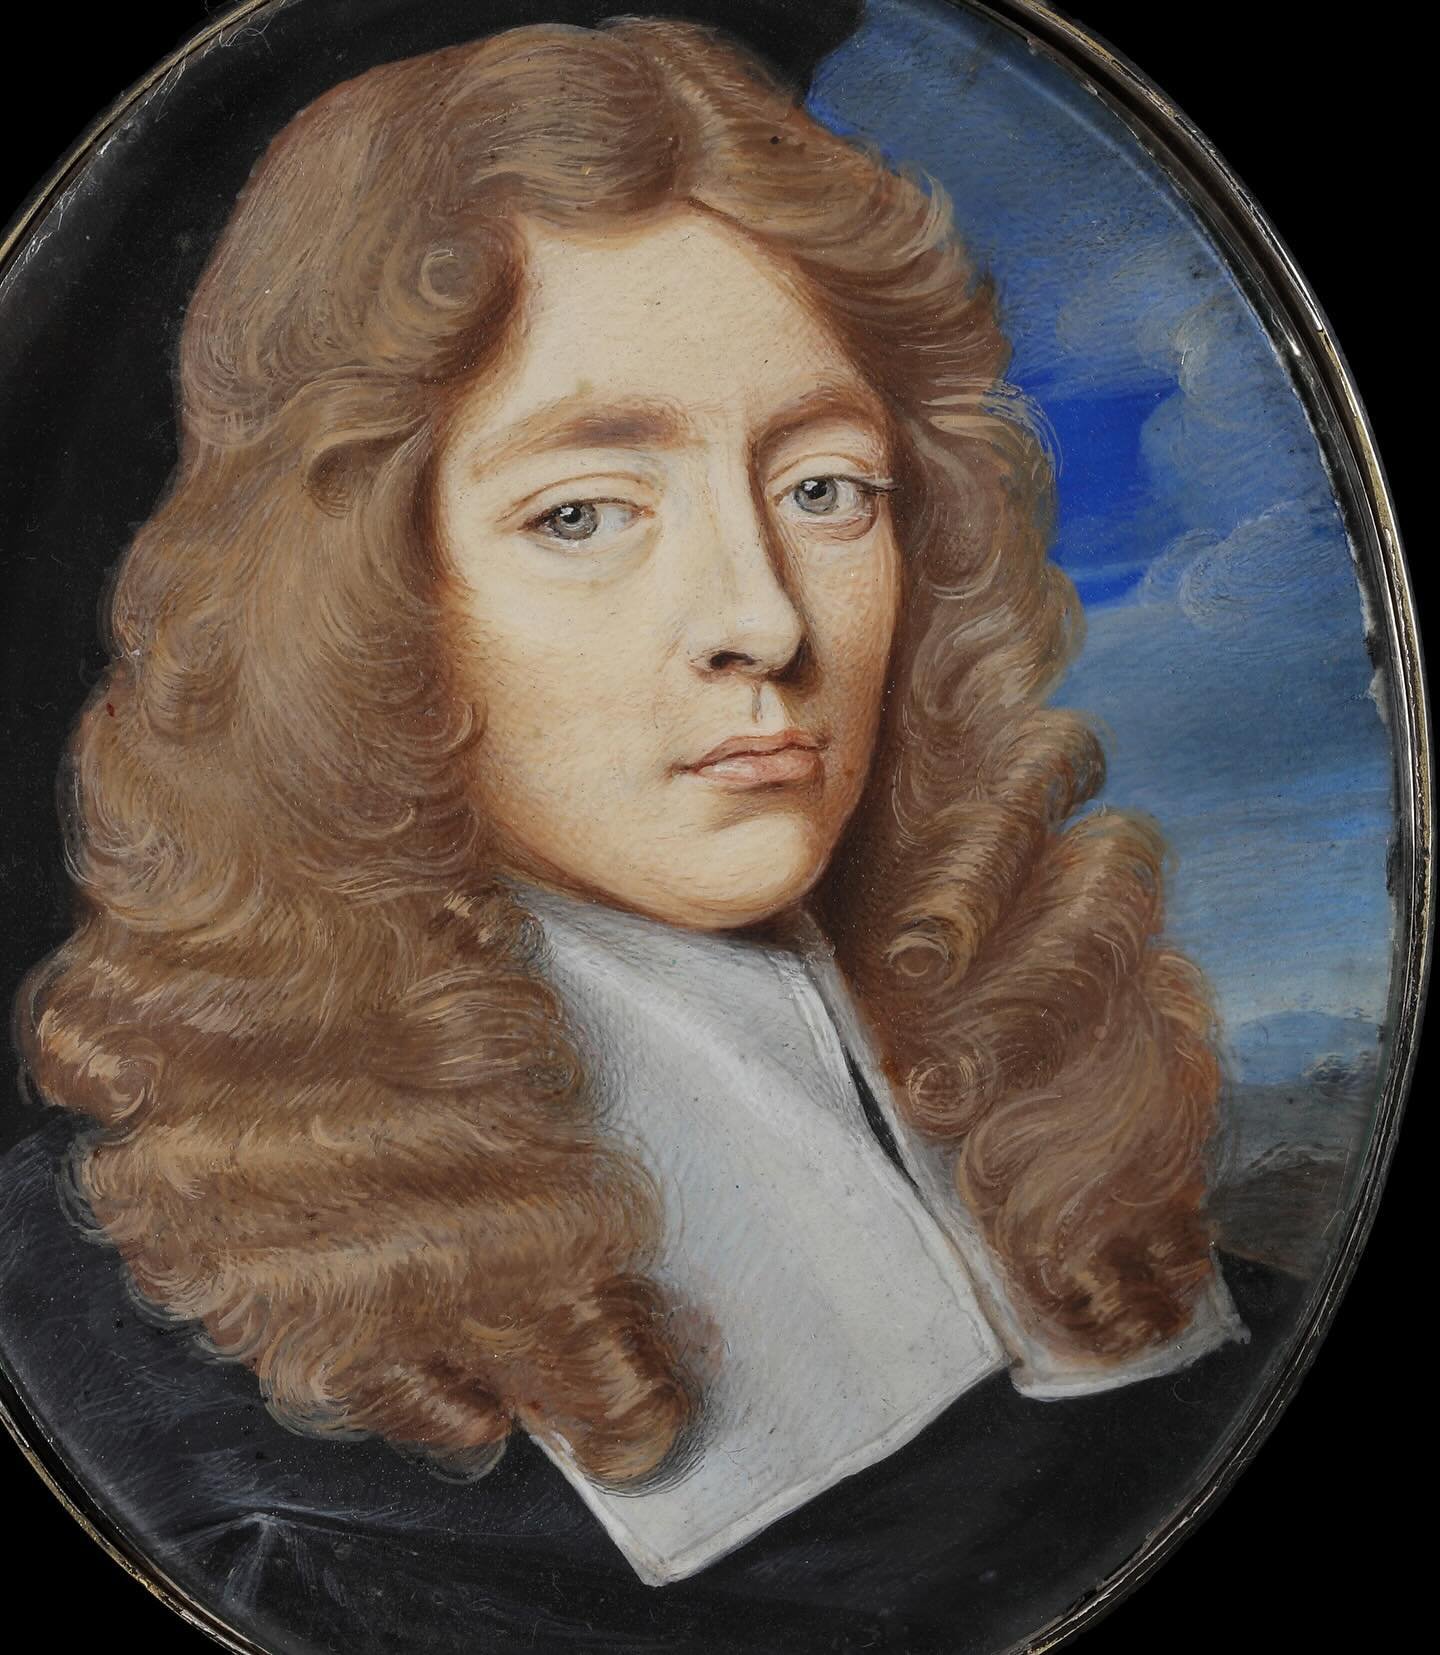 This portrait miniature &ndash; recently added to the website &ndash; is a charming example of the work of Thomas Flatman (1635-88) and was exhibited at the National Portrait Gallery at the end of the 19th century.

Flatman&rsquo;s subjects always lo